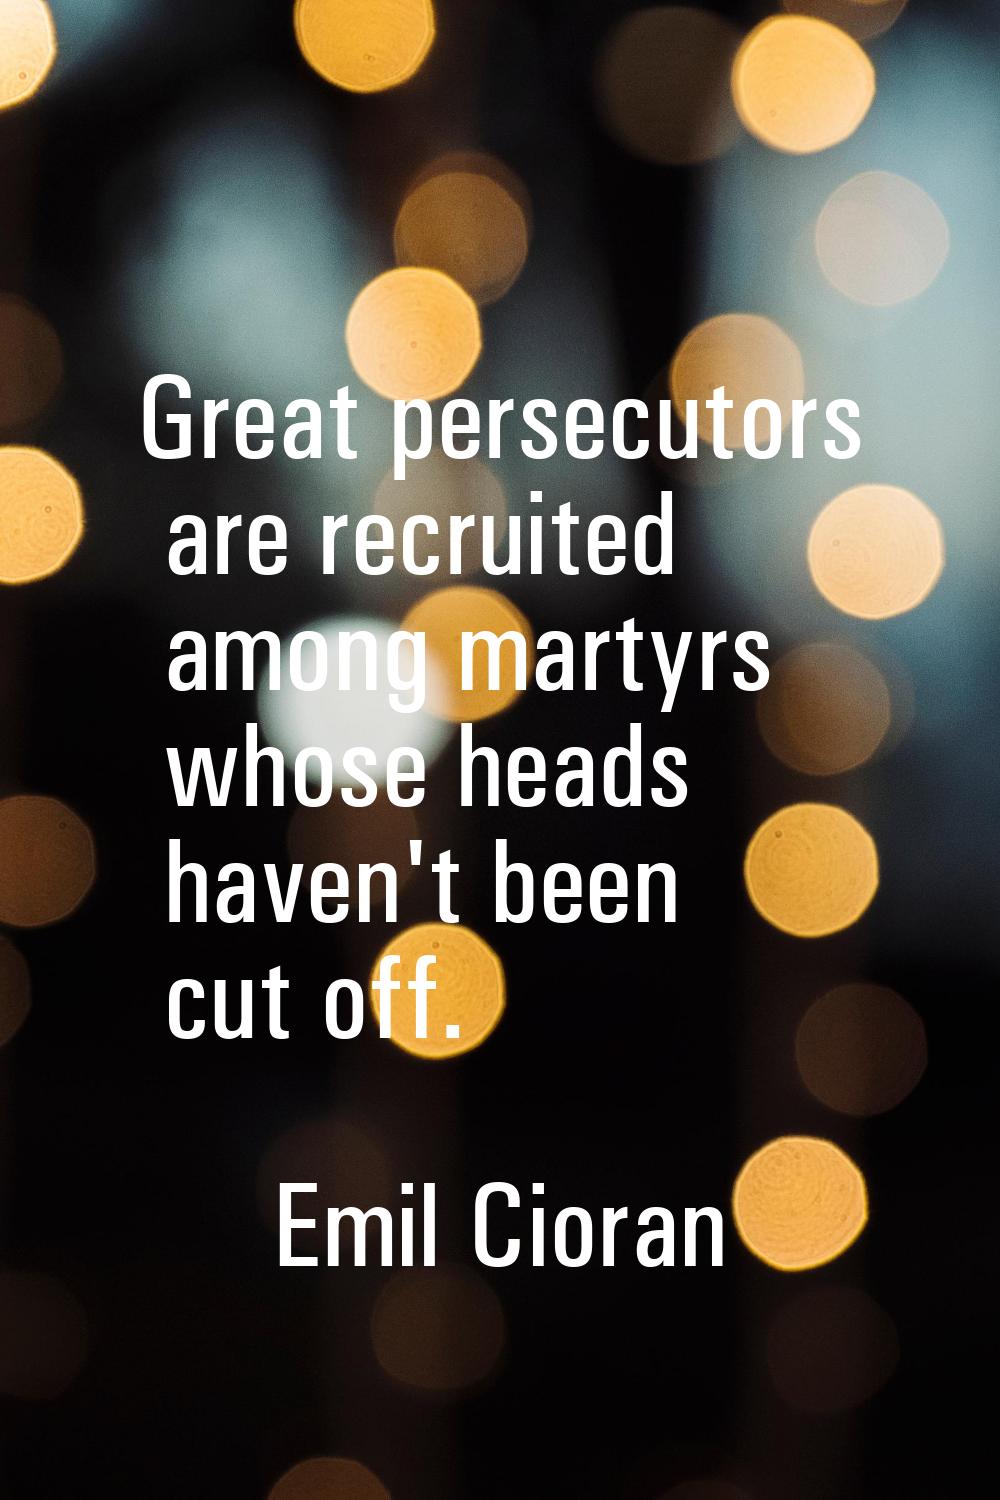 Great persecutors are recruited among martyrs whose heads haven't been cut off.